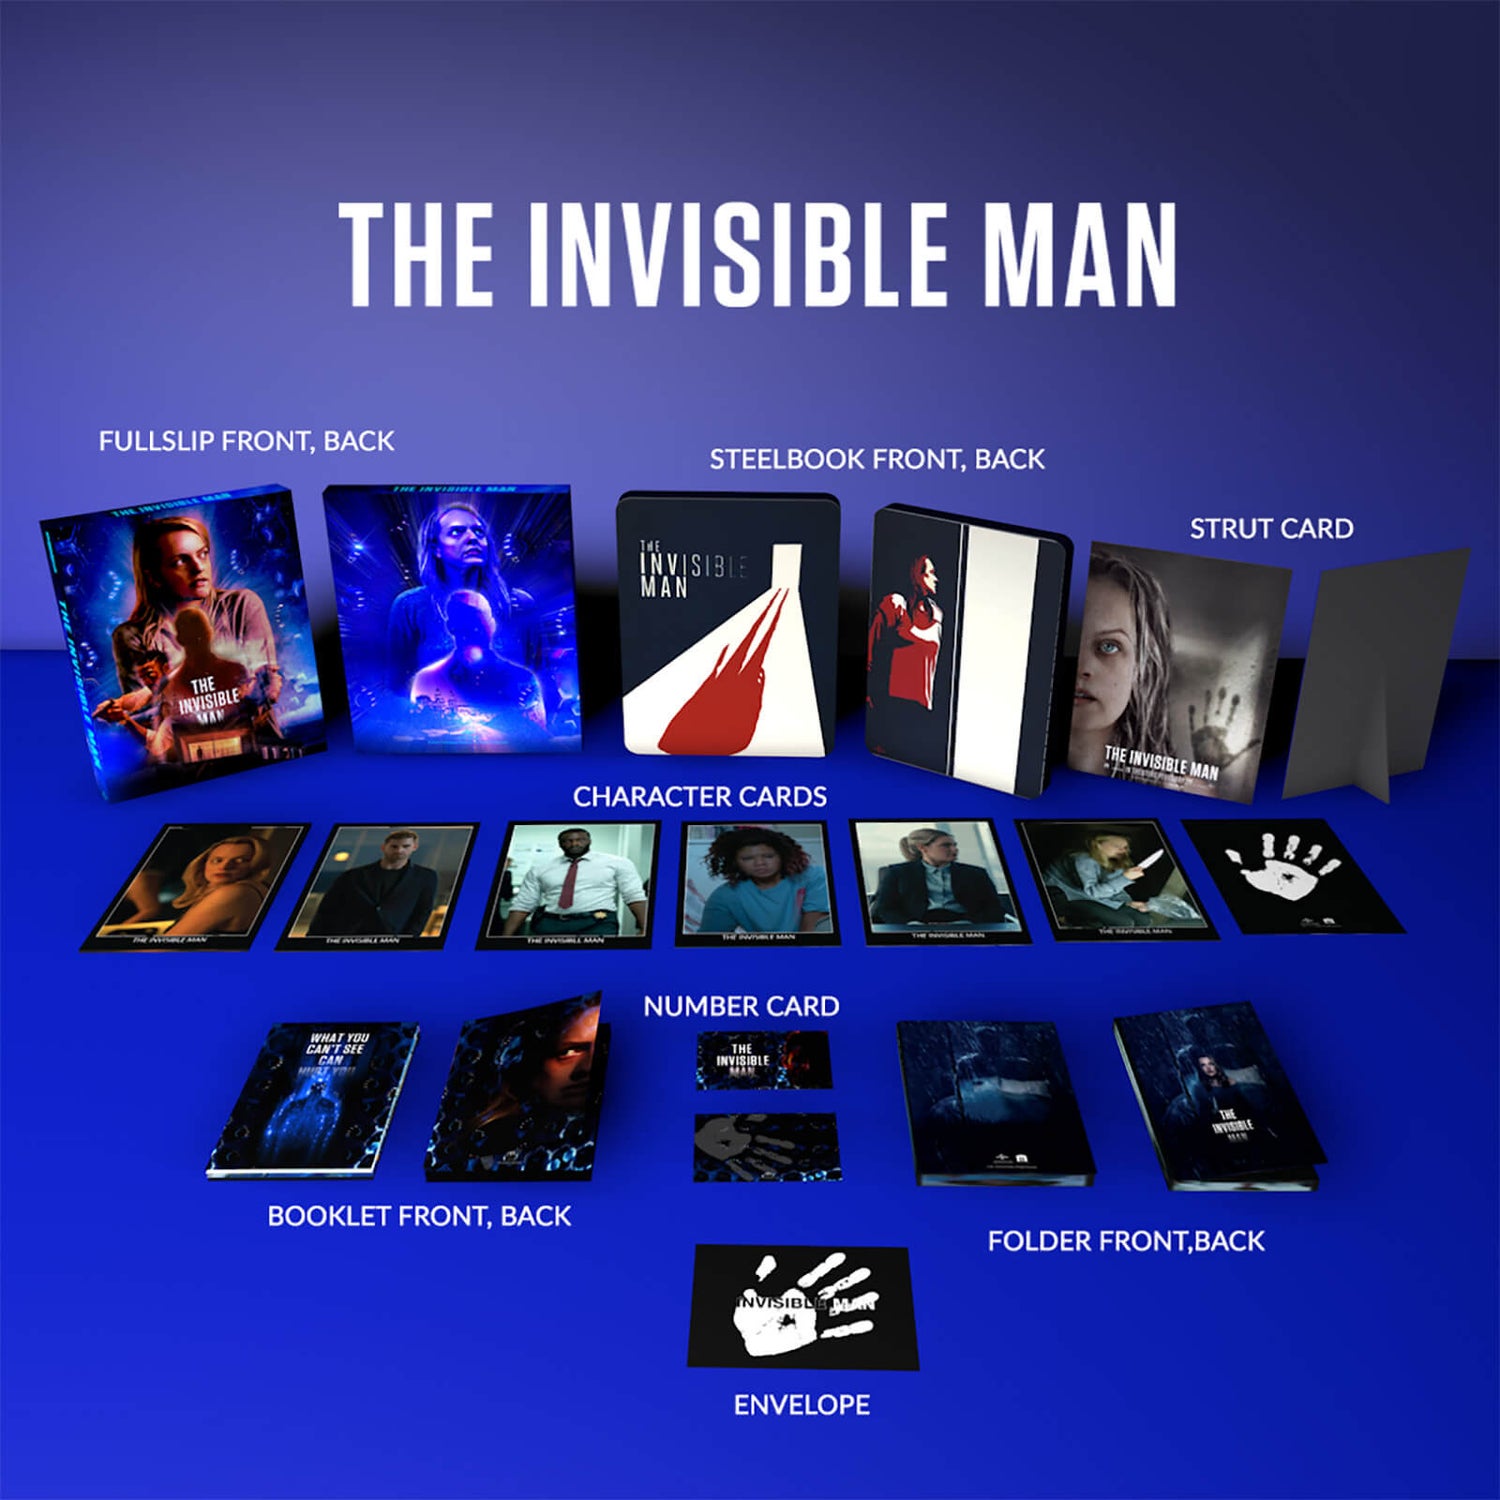 Invisible Man - Steelbook 4K Ultra HD Édition Limitée Collector (Blu-ray inclus)